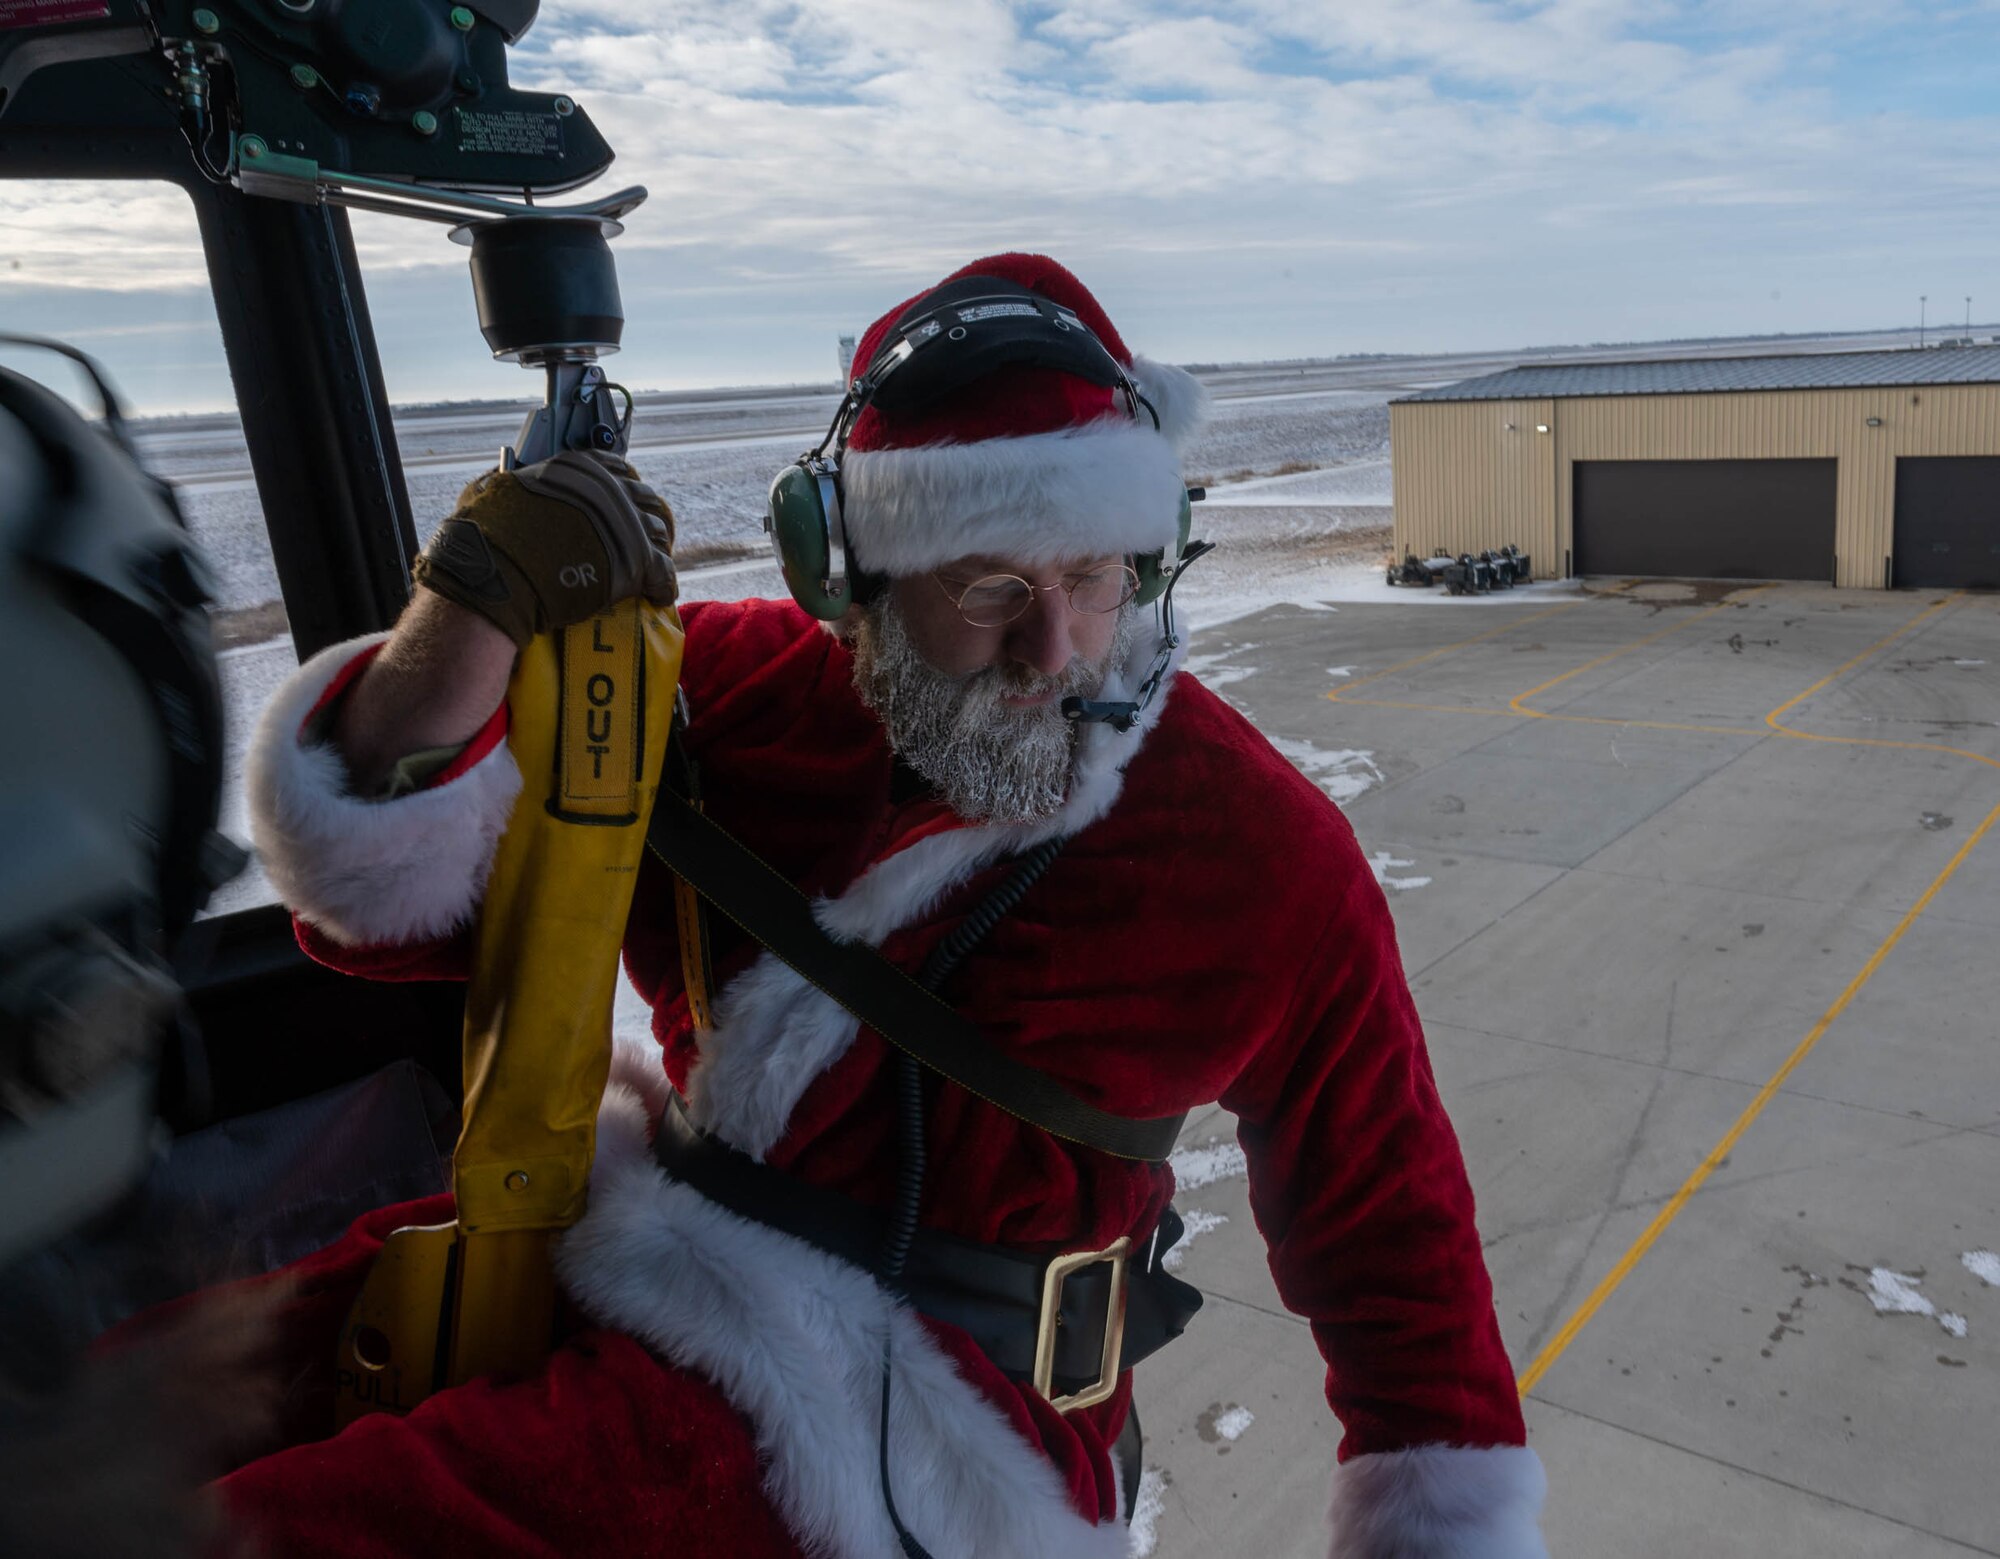 Santa Claus prepares to lower to an awaiting crowd at Minot Air Force Base, North Dakota on December 10, 2023. After waving to families throughout Minot, N.D. and Minot Air Force Base, Claus ends the day with a grand entrance to the 54th Helicopter Squadron holiday party. (U.S. Air Force photo by A1C Luis Gomez)